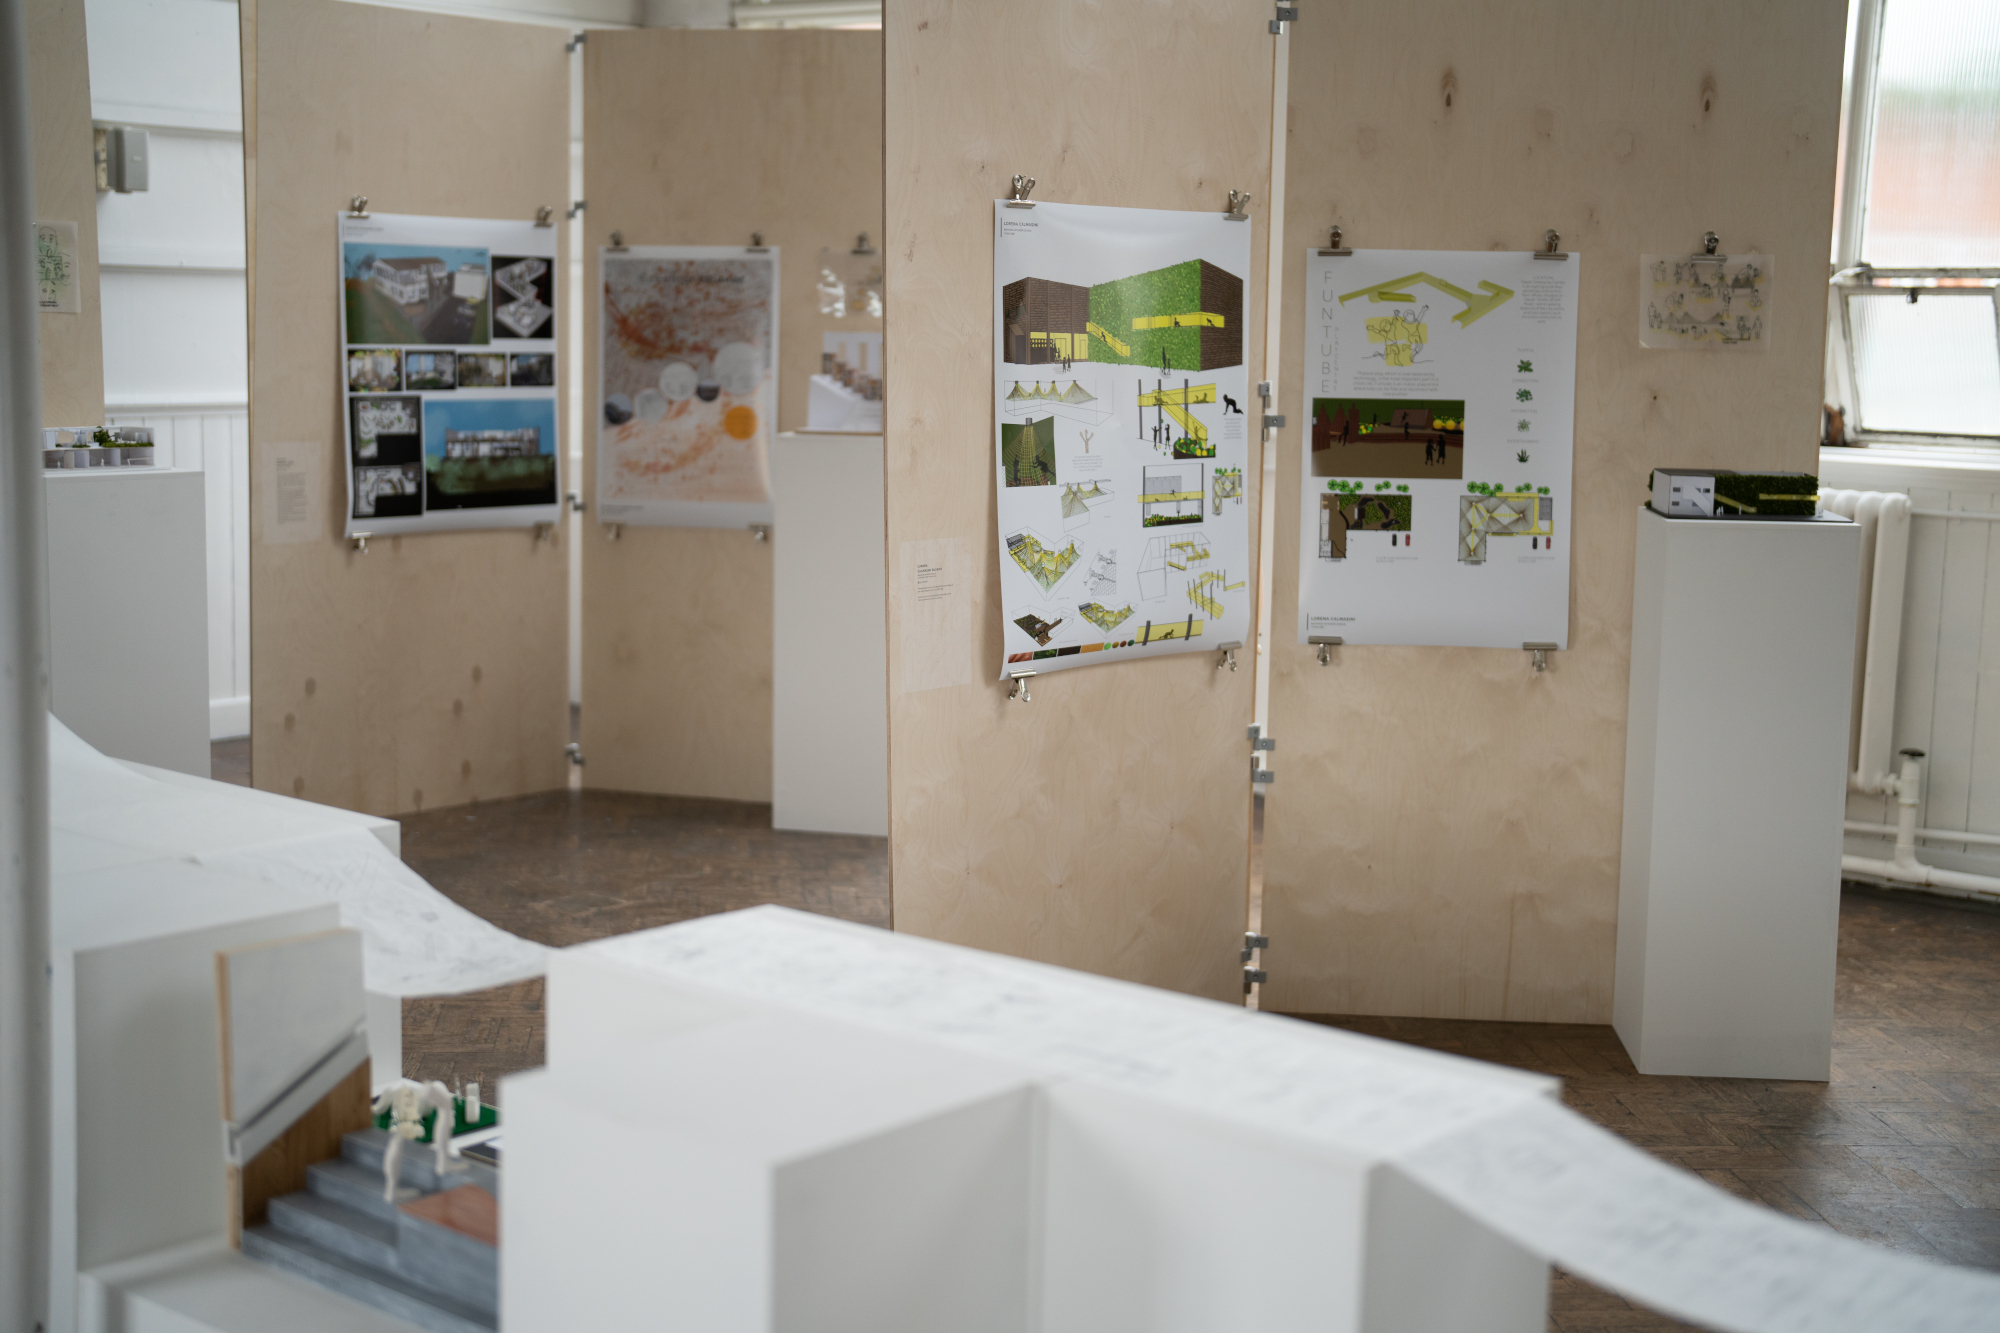 Various interior design plans and models on display